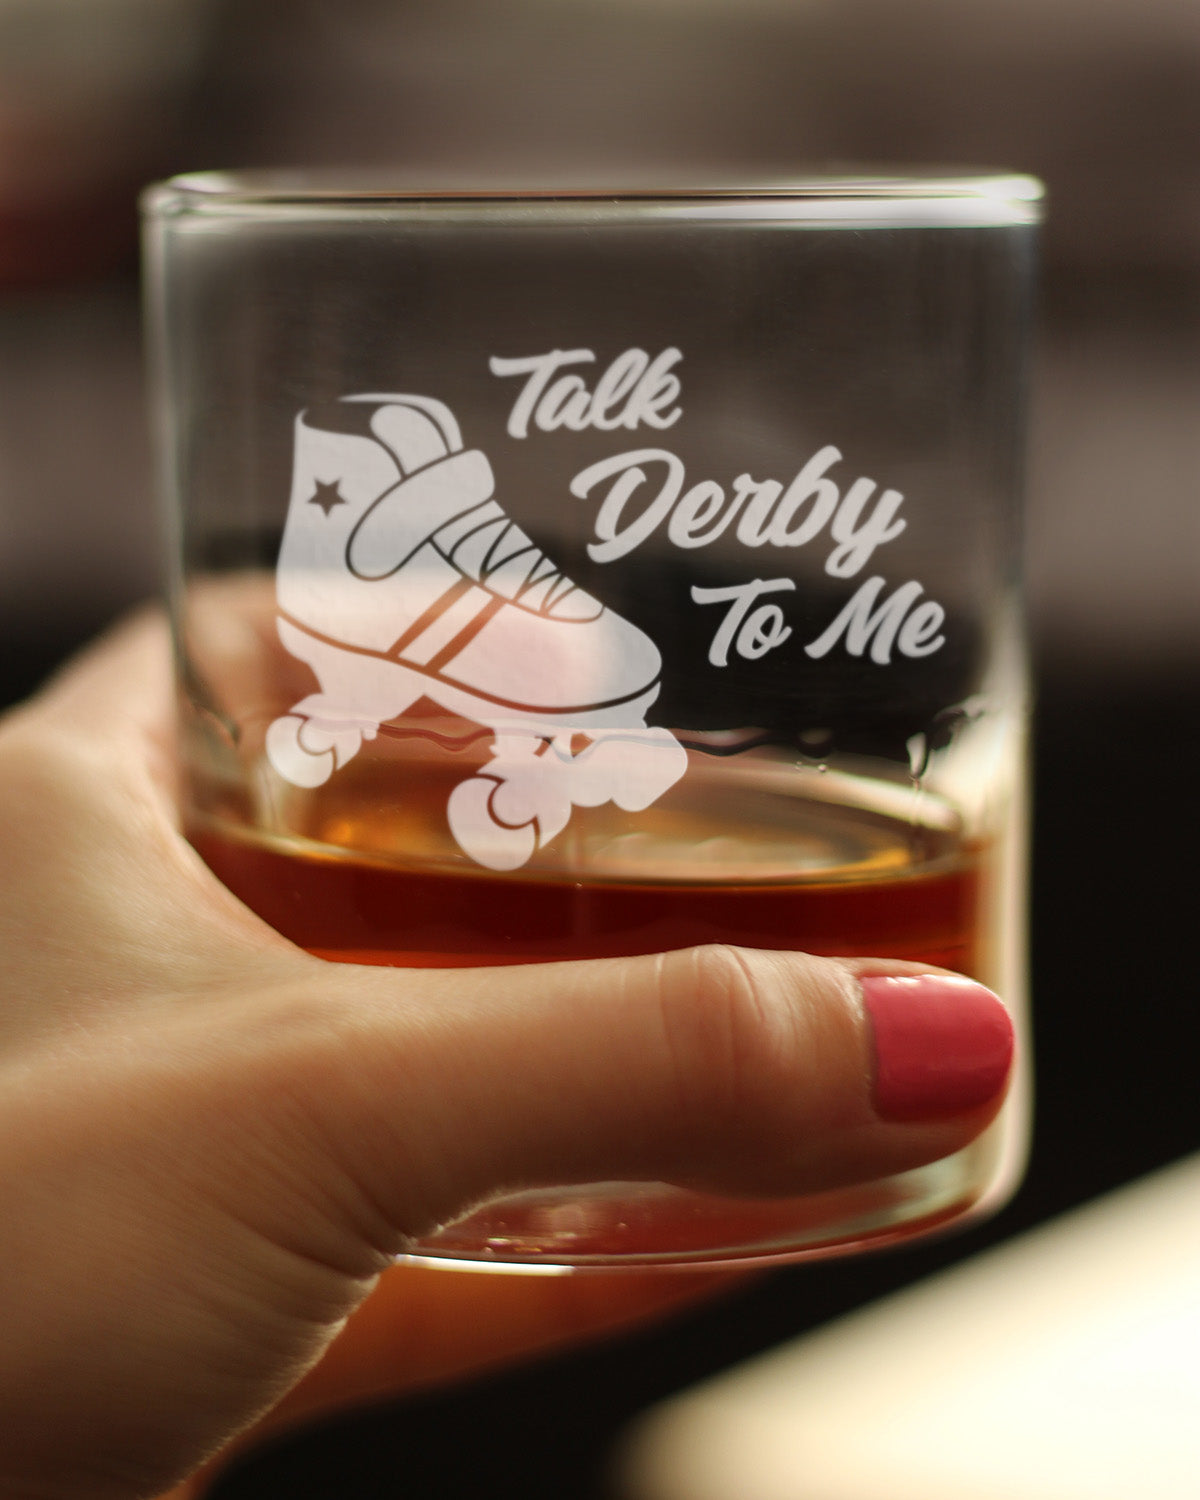 Talk Derby To Me - Whiskey Rocks Glass Gifts - Funny Rollerblading Gifts and Decor for Men &amp; Women - 10.25 Oz Glasses